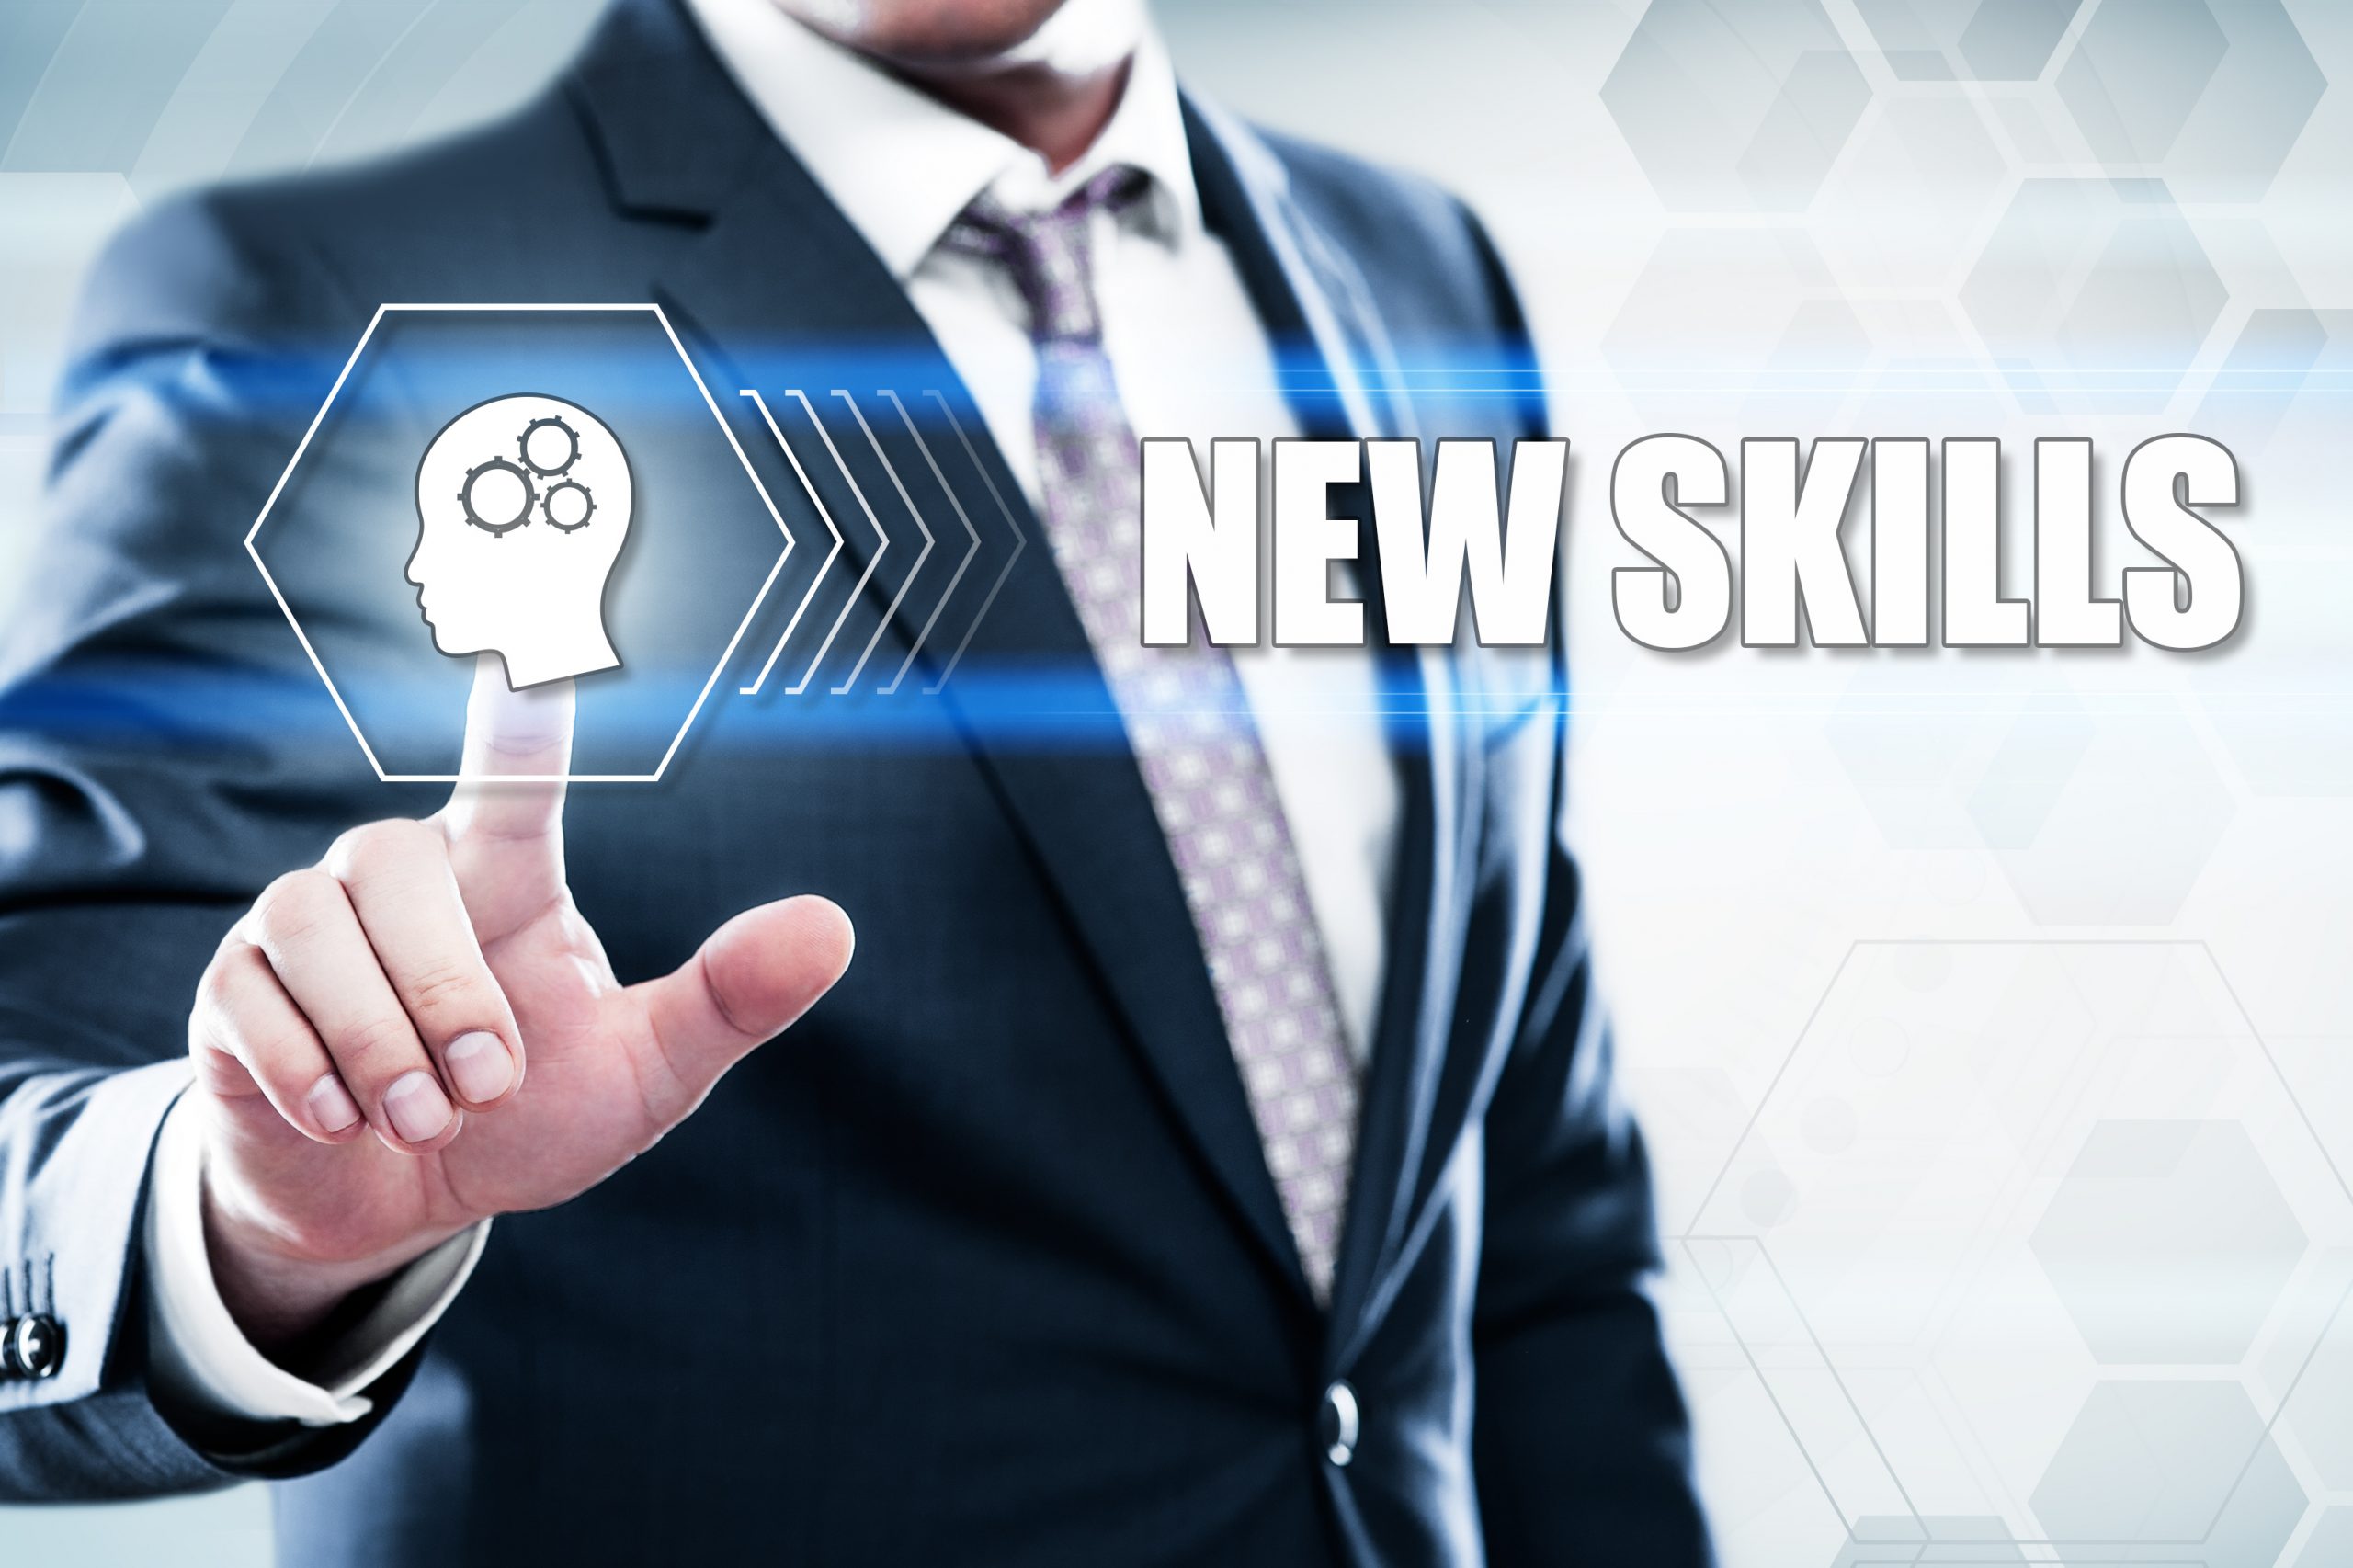 How sales skills are critical to win with today’s ‘new’ customer